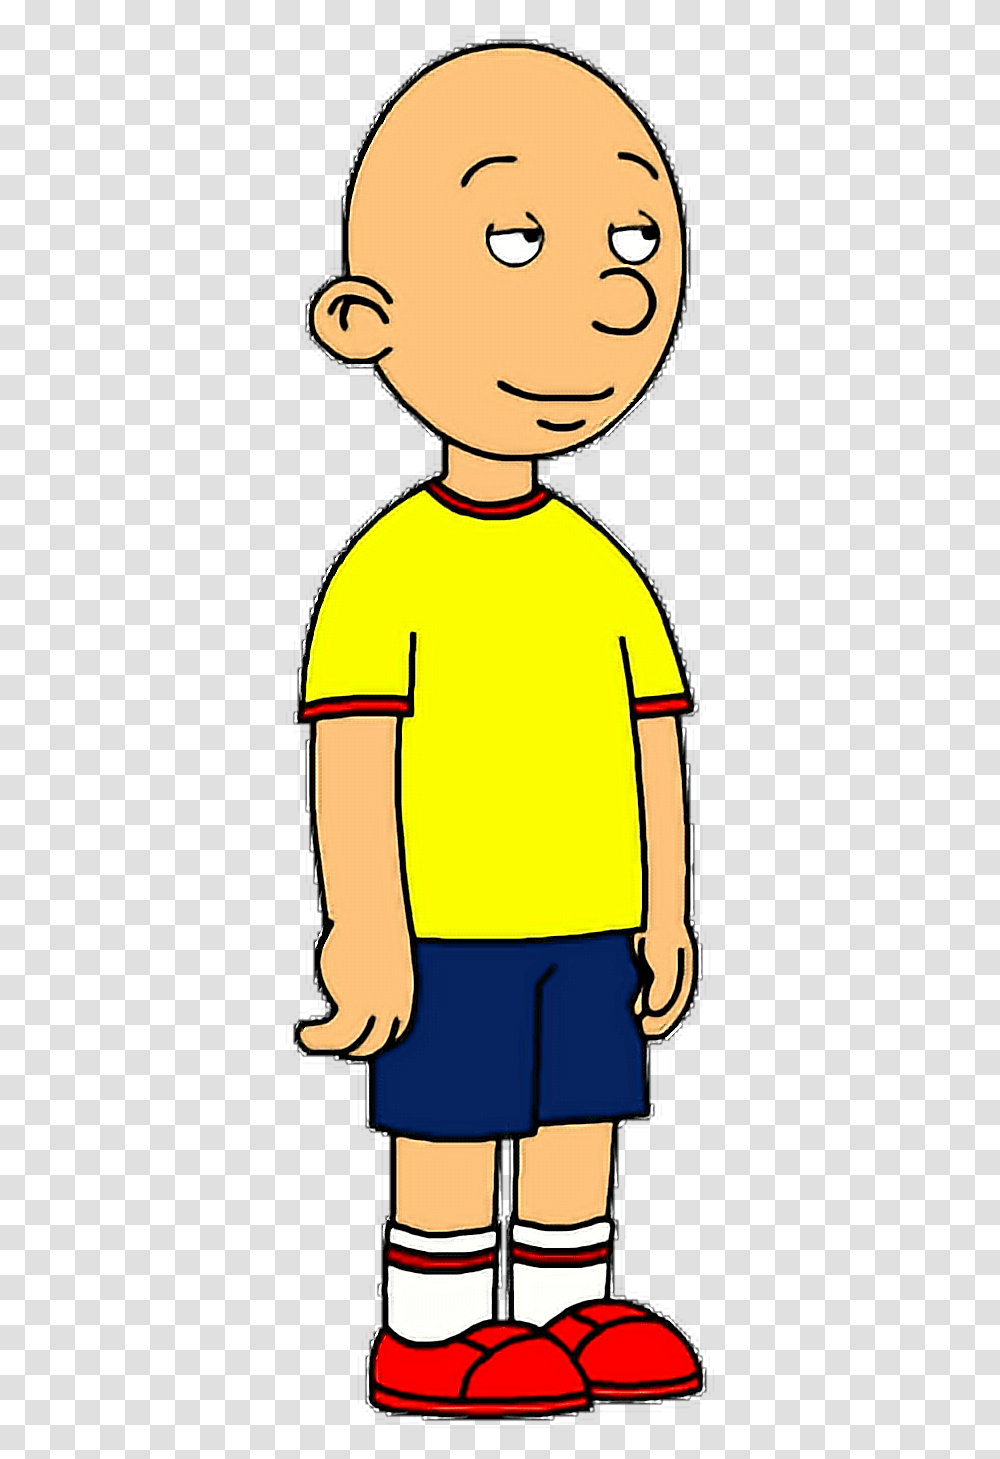 Caillou Goanimate Grounded Youregrounded Freetoedit Goanimate Caillou, Label, Person Transparent Png